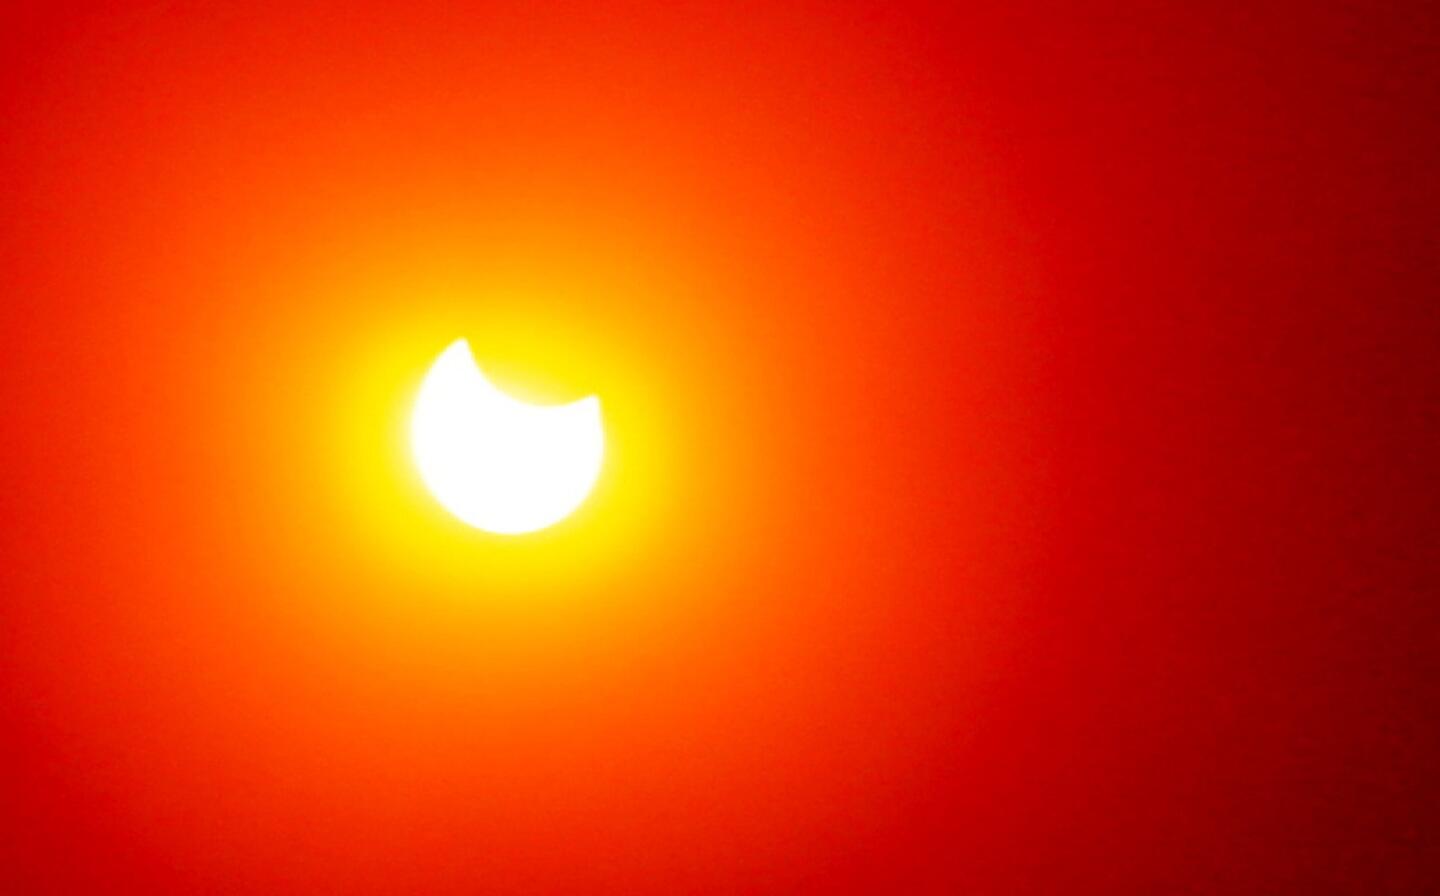 The partial eclipse of the sun as seen from the Mt. Wilson Observatory on Oct. 23.